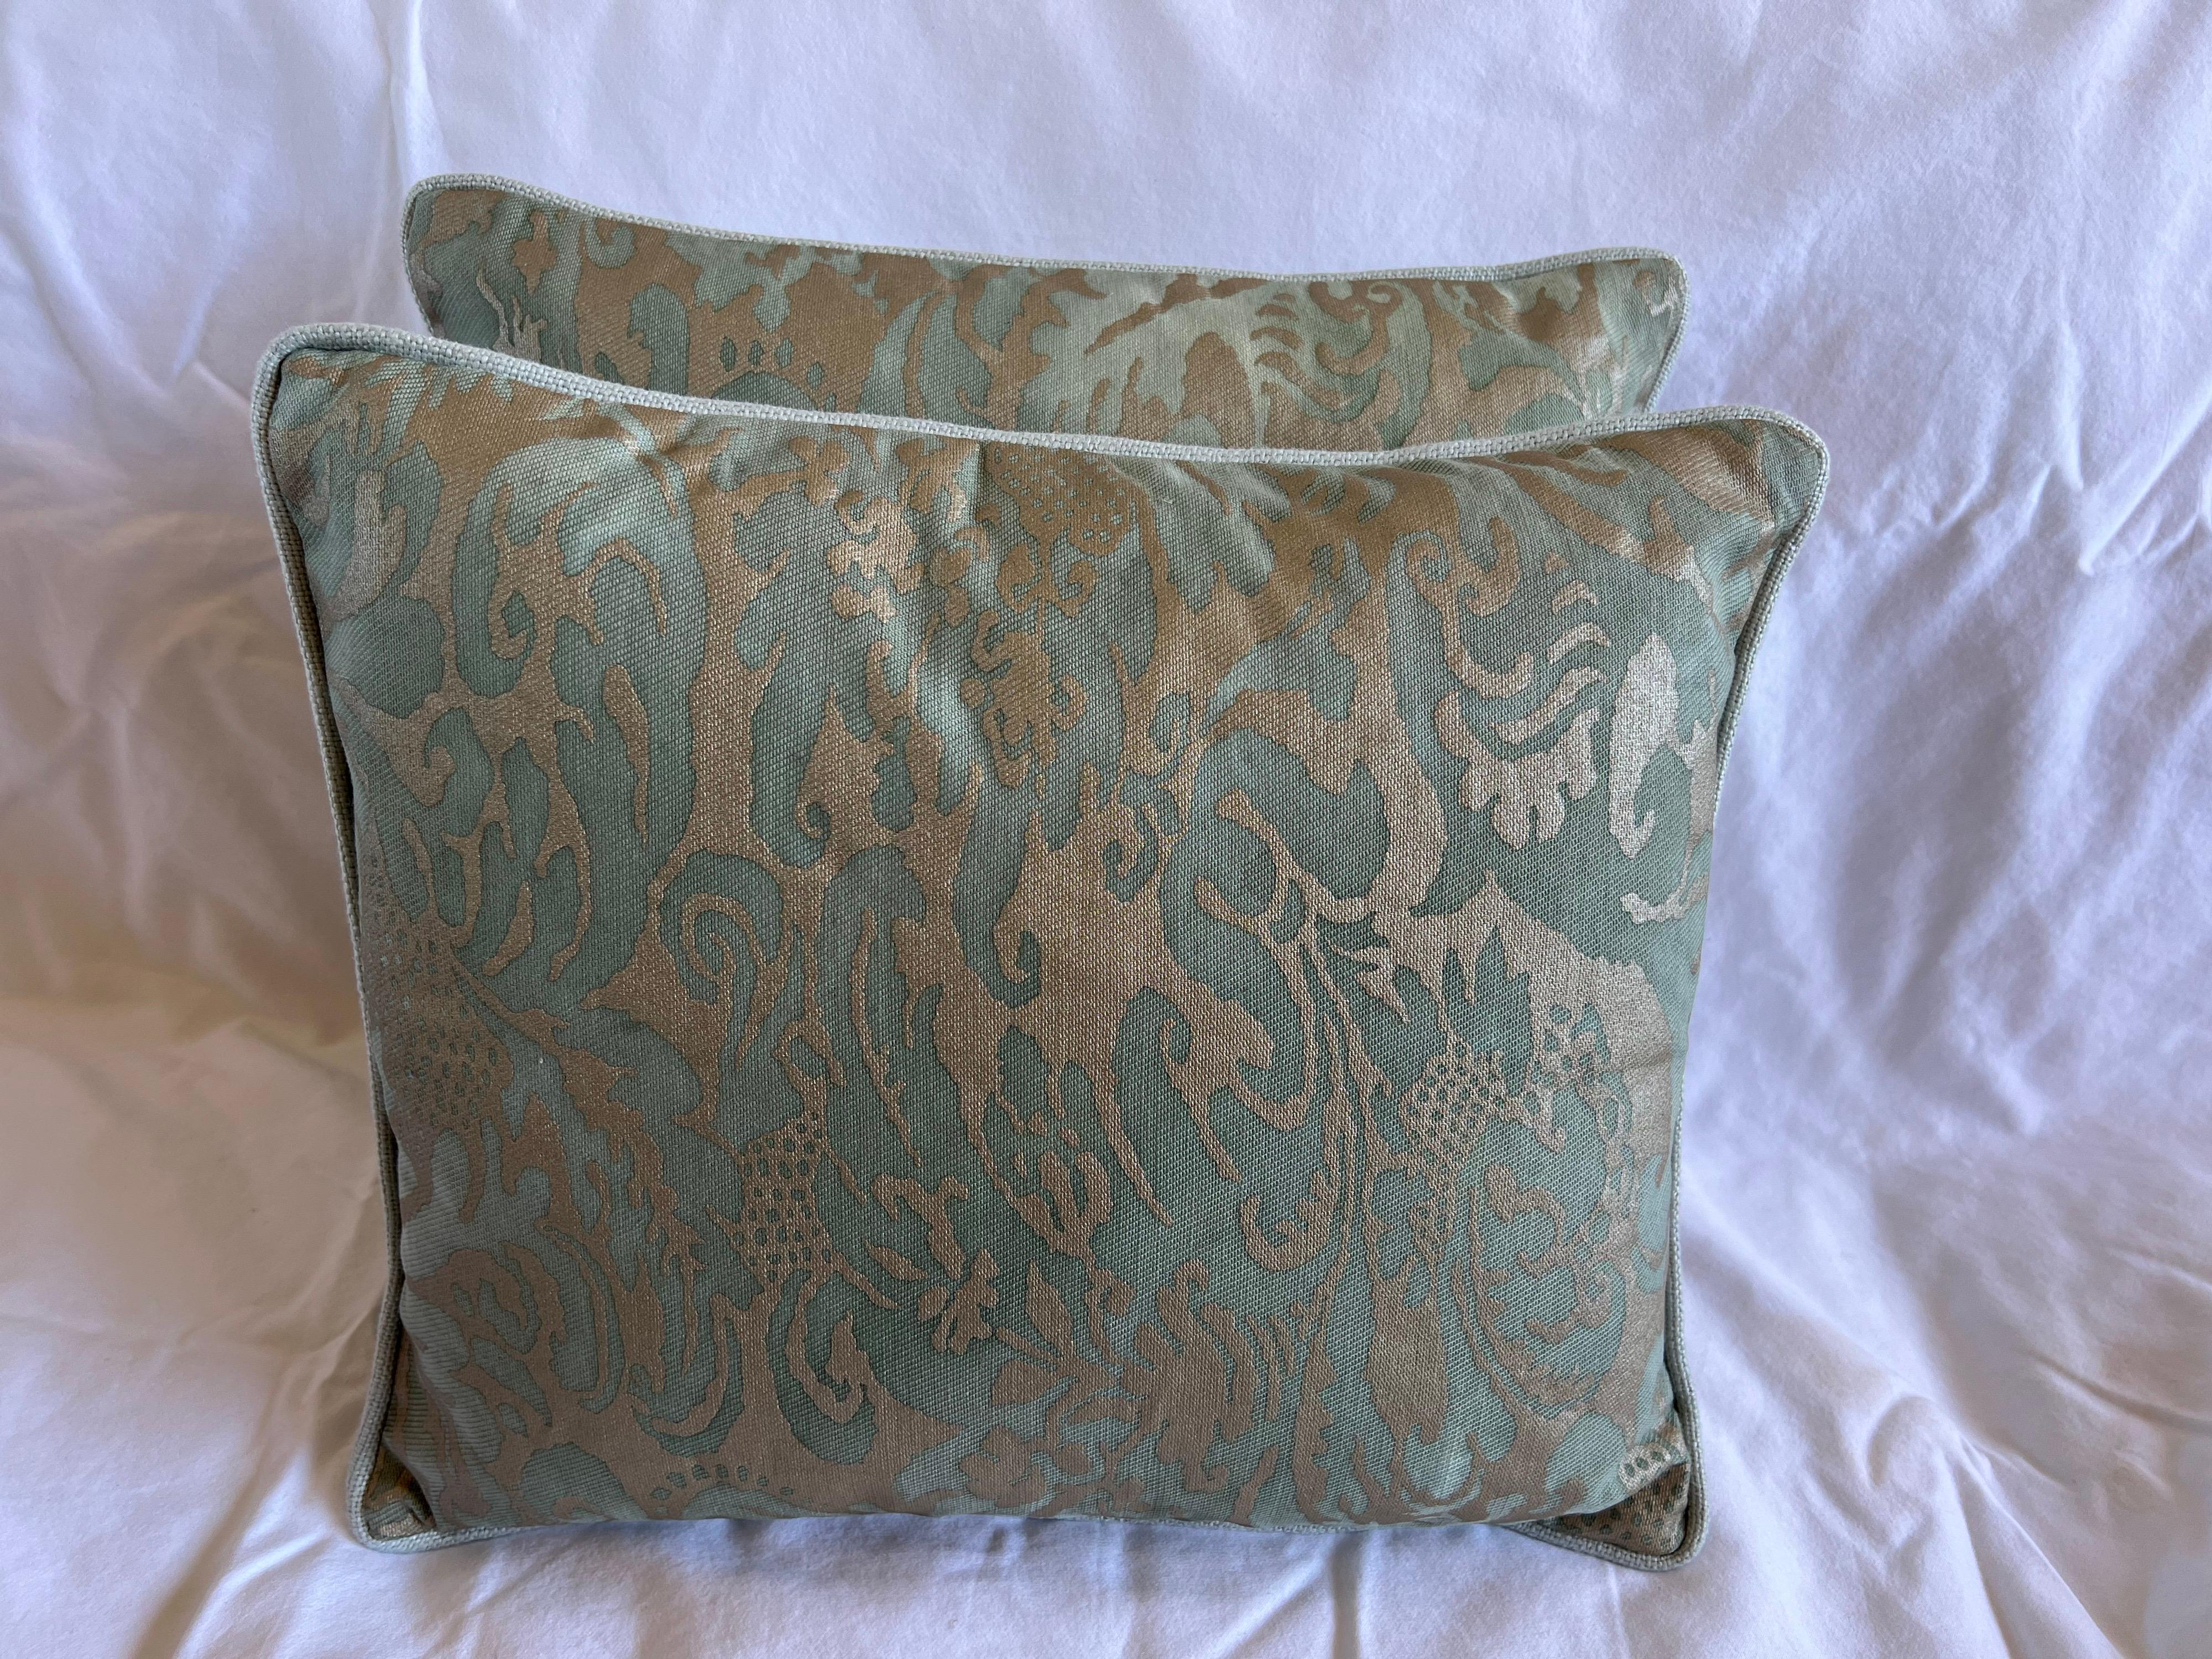 Pair of custom pillows made with soft blue & silvery gold printed cotton fronts and linen back. Down inserts, sewn closed.